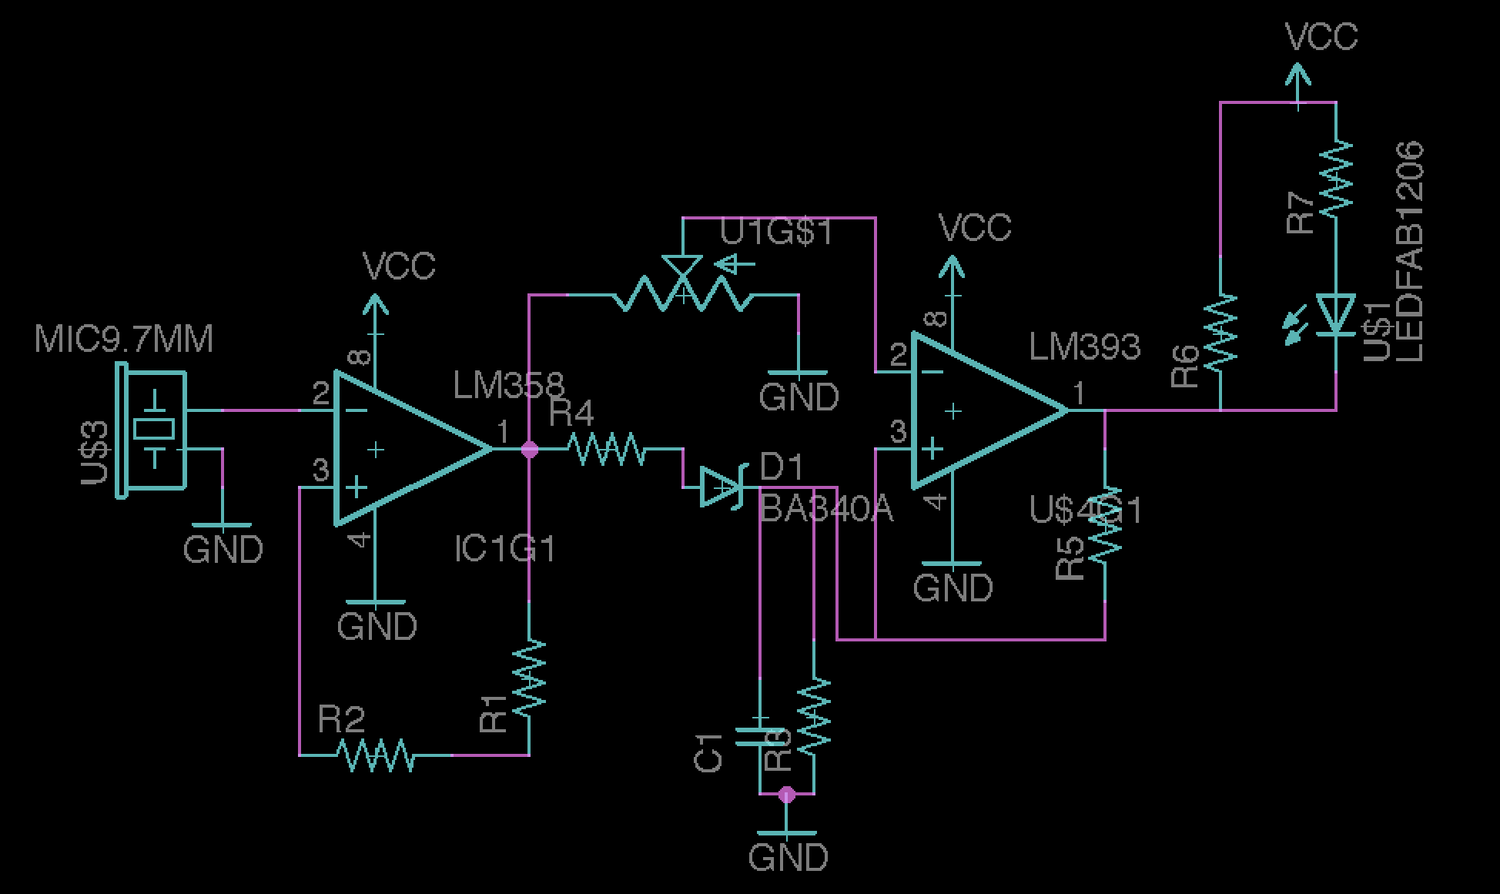 Bright a magenta and teal circuit board schematic against a dark background